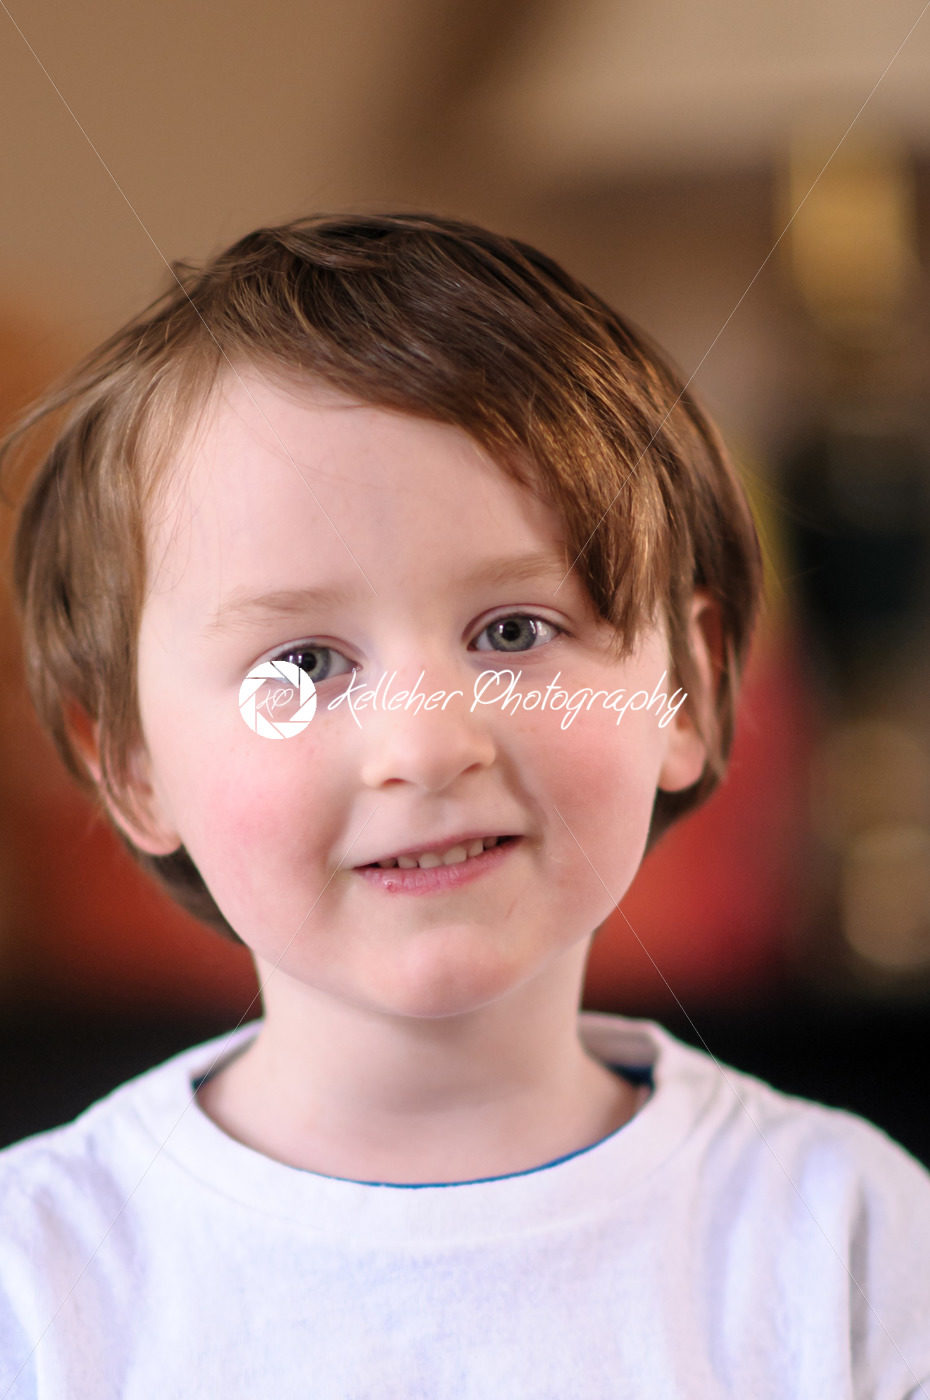 Portrait of a cute little boy smiling Indoors - Kelleher Photography Store